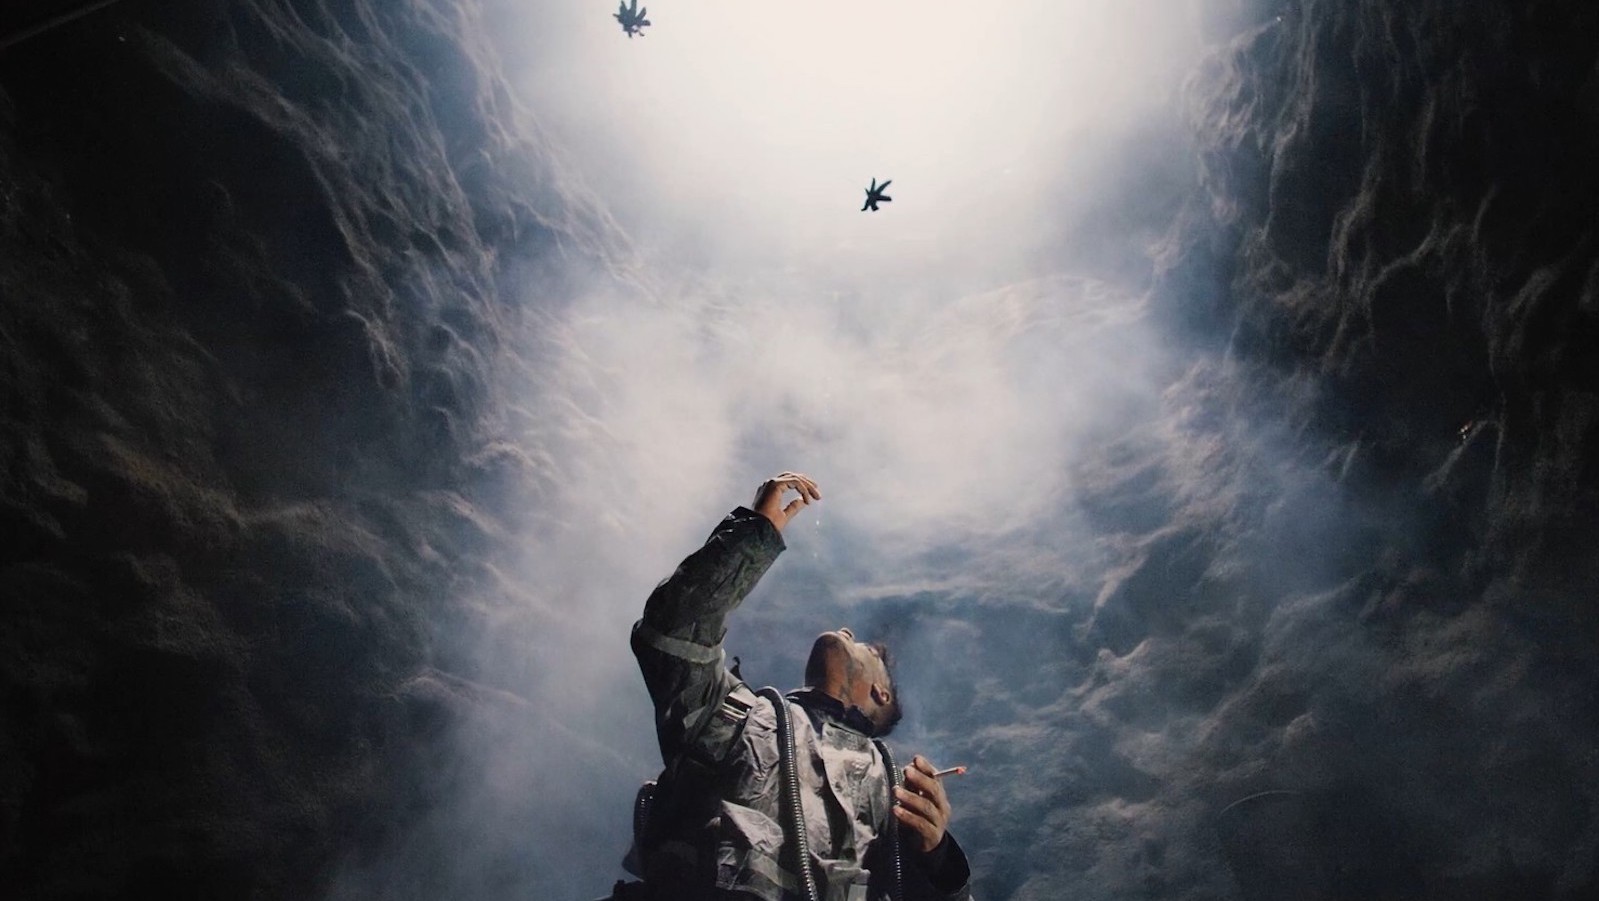 A man reaches up in the middle of a cave at floating leaves above his head